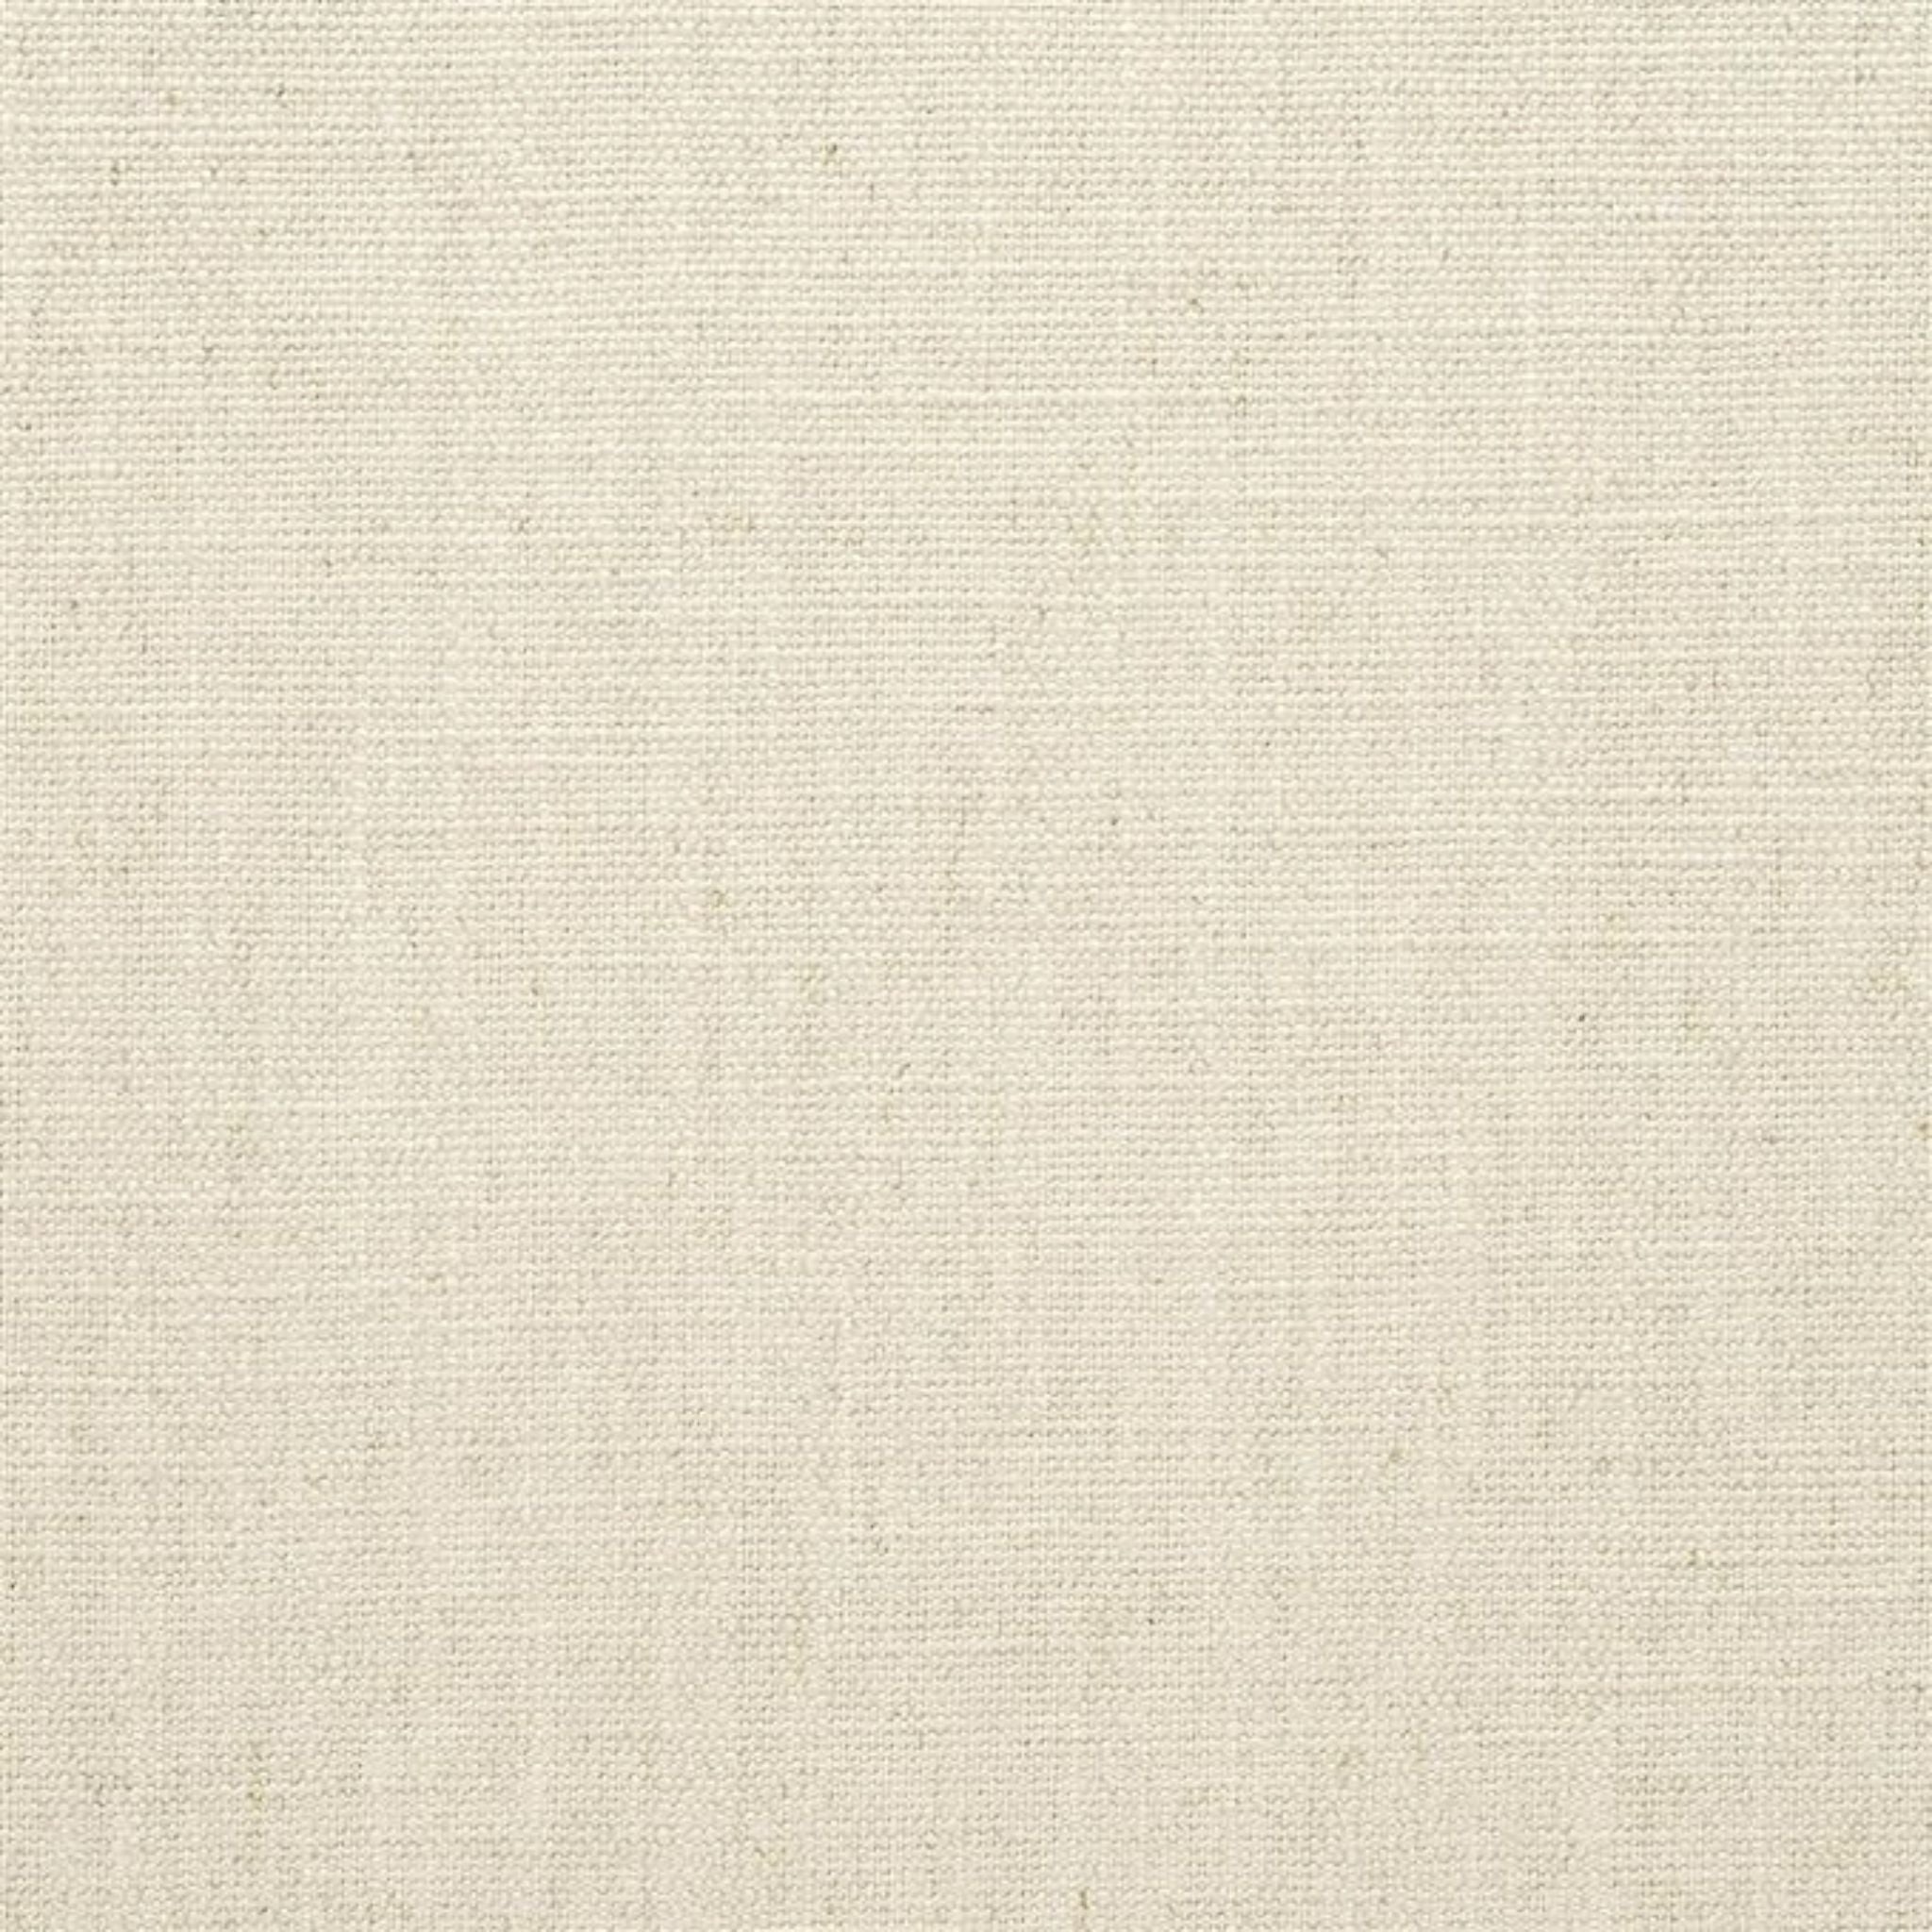 Washed calico midweight cotton fabric